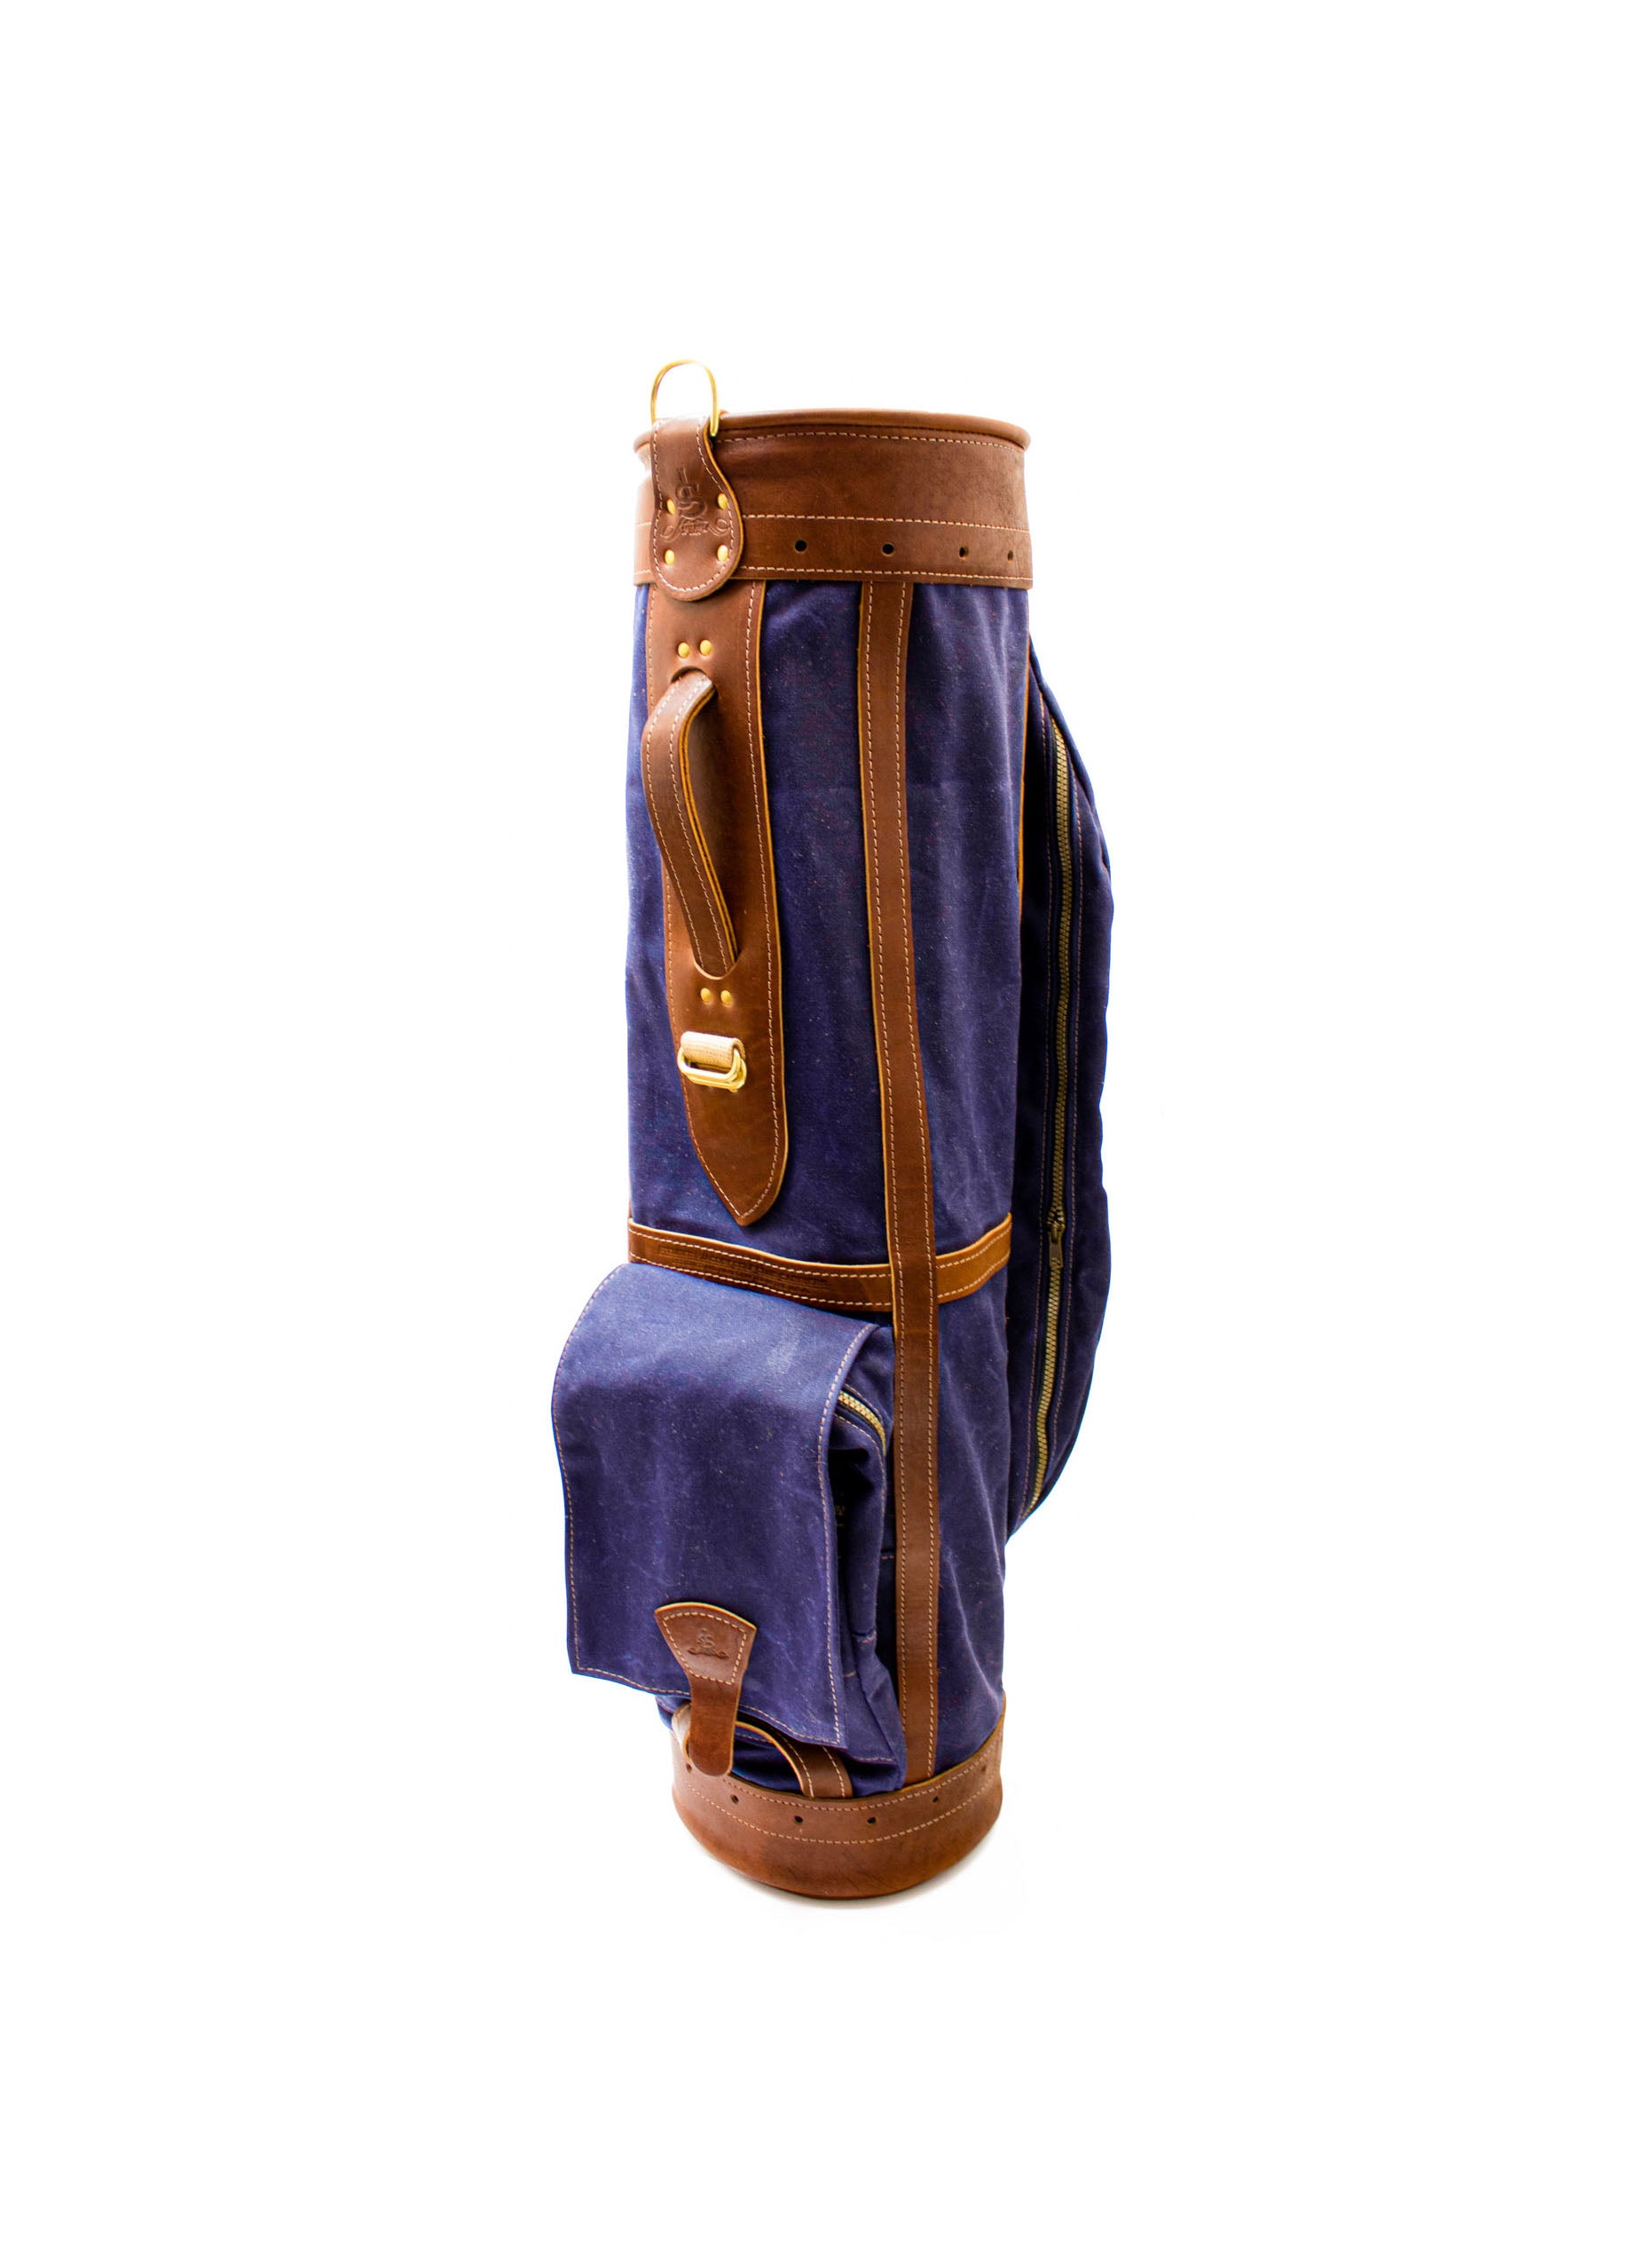 Leather & Waxed Canvas Classic Staff Golf Bag- Navy with Chestnut Leather